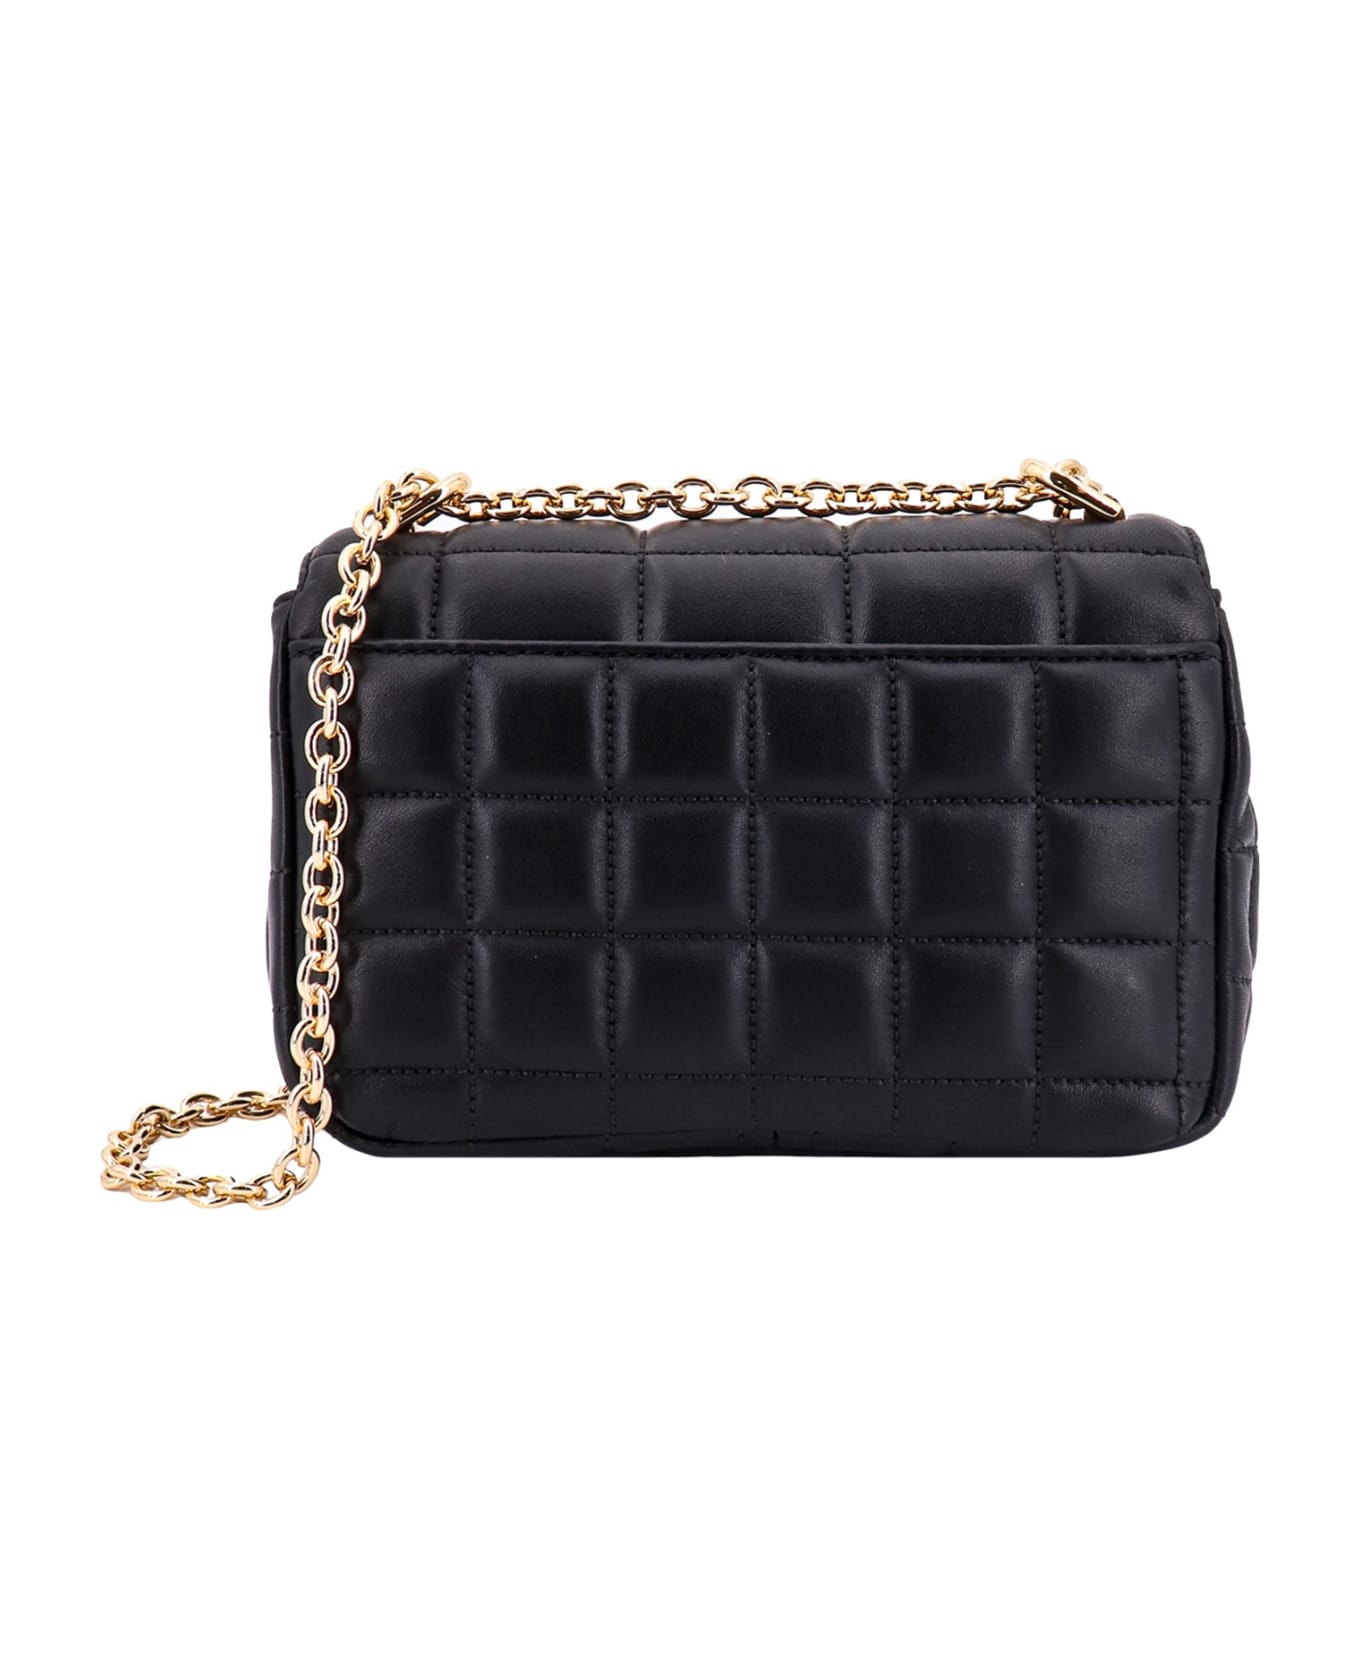 Michael Kors Soho Small Quilted Leather Shoulder Bag - Black ショルダーバッグ